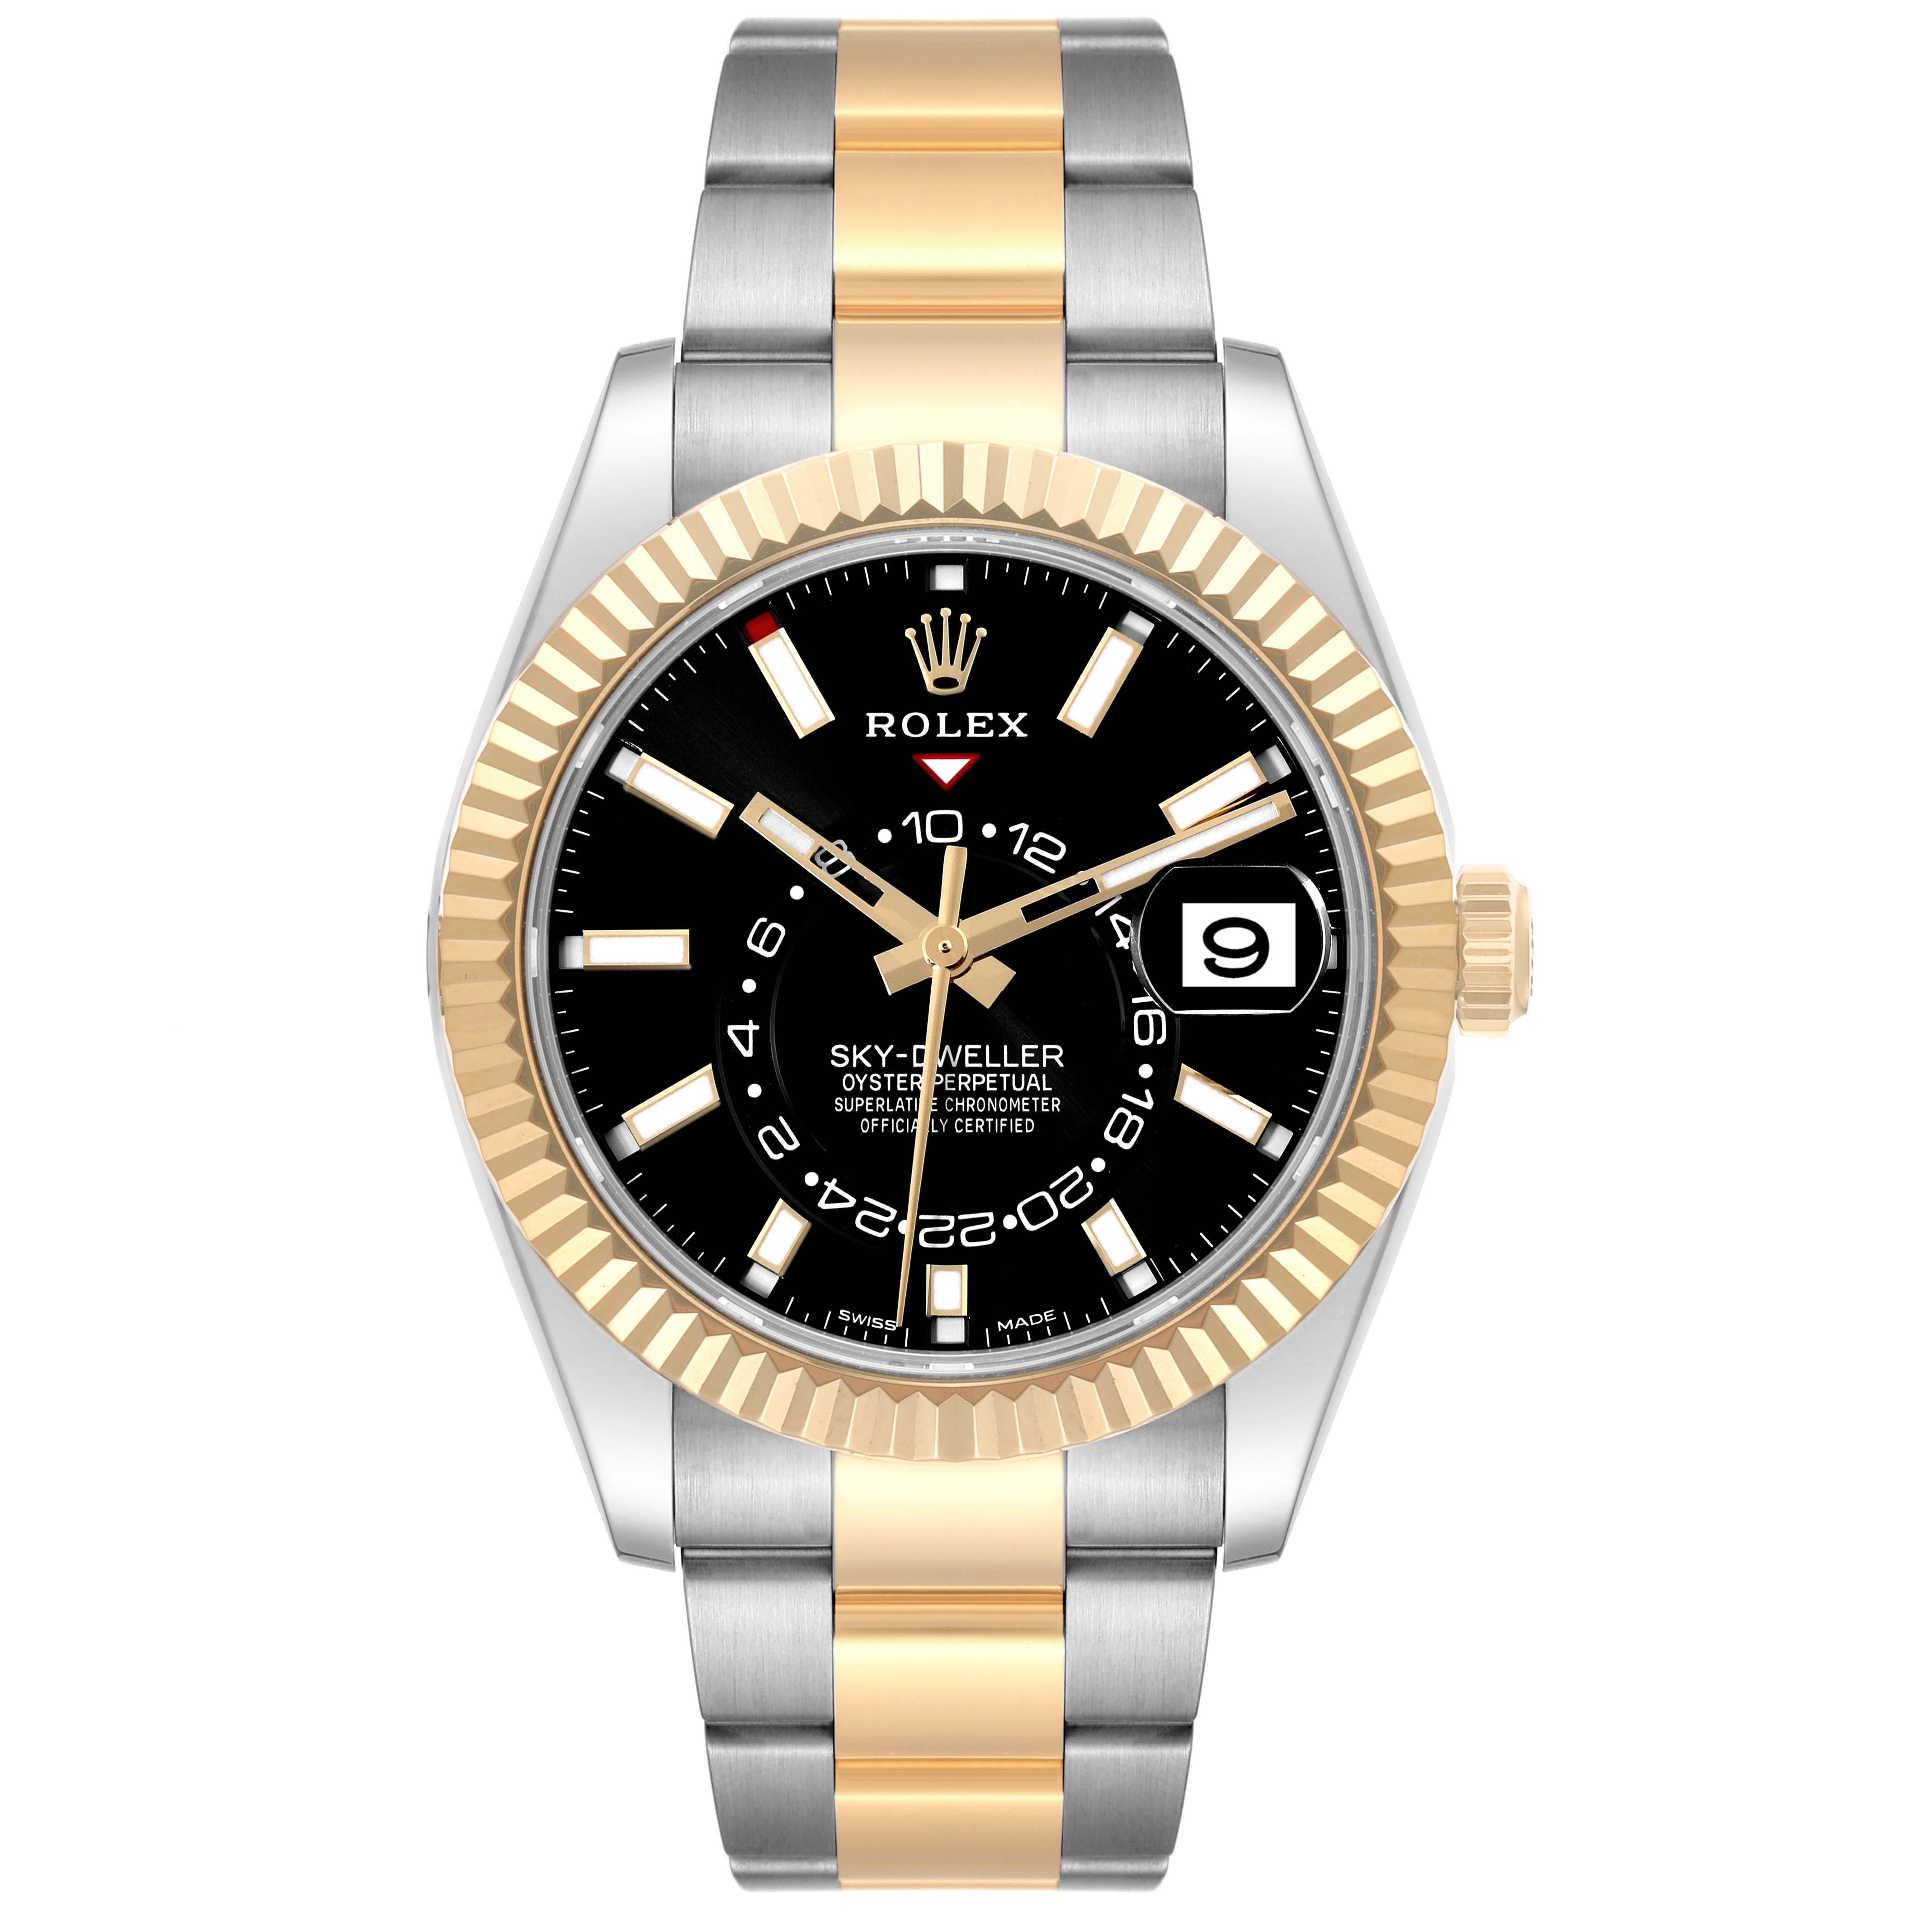 Rolex Sky Dweller Steel Yellow Gold Black Dial Mens Watch 326933 Unworn. Officially certified chronometer automatic self-winding movement. Dual time zones, annual calendar. Paramagnetic blue Parachrom hairspring. High-performance Paraflex shock